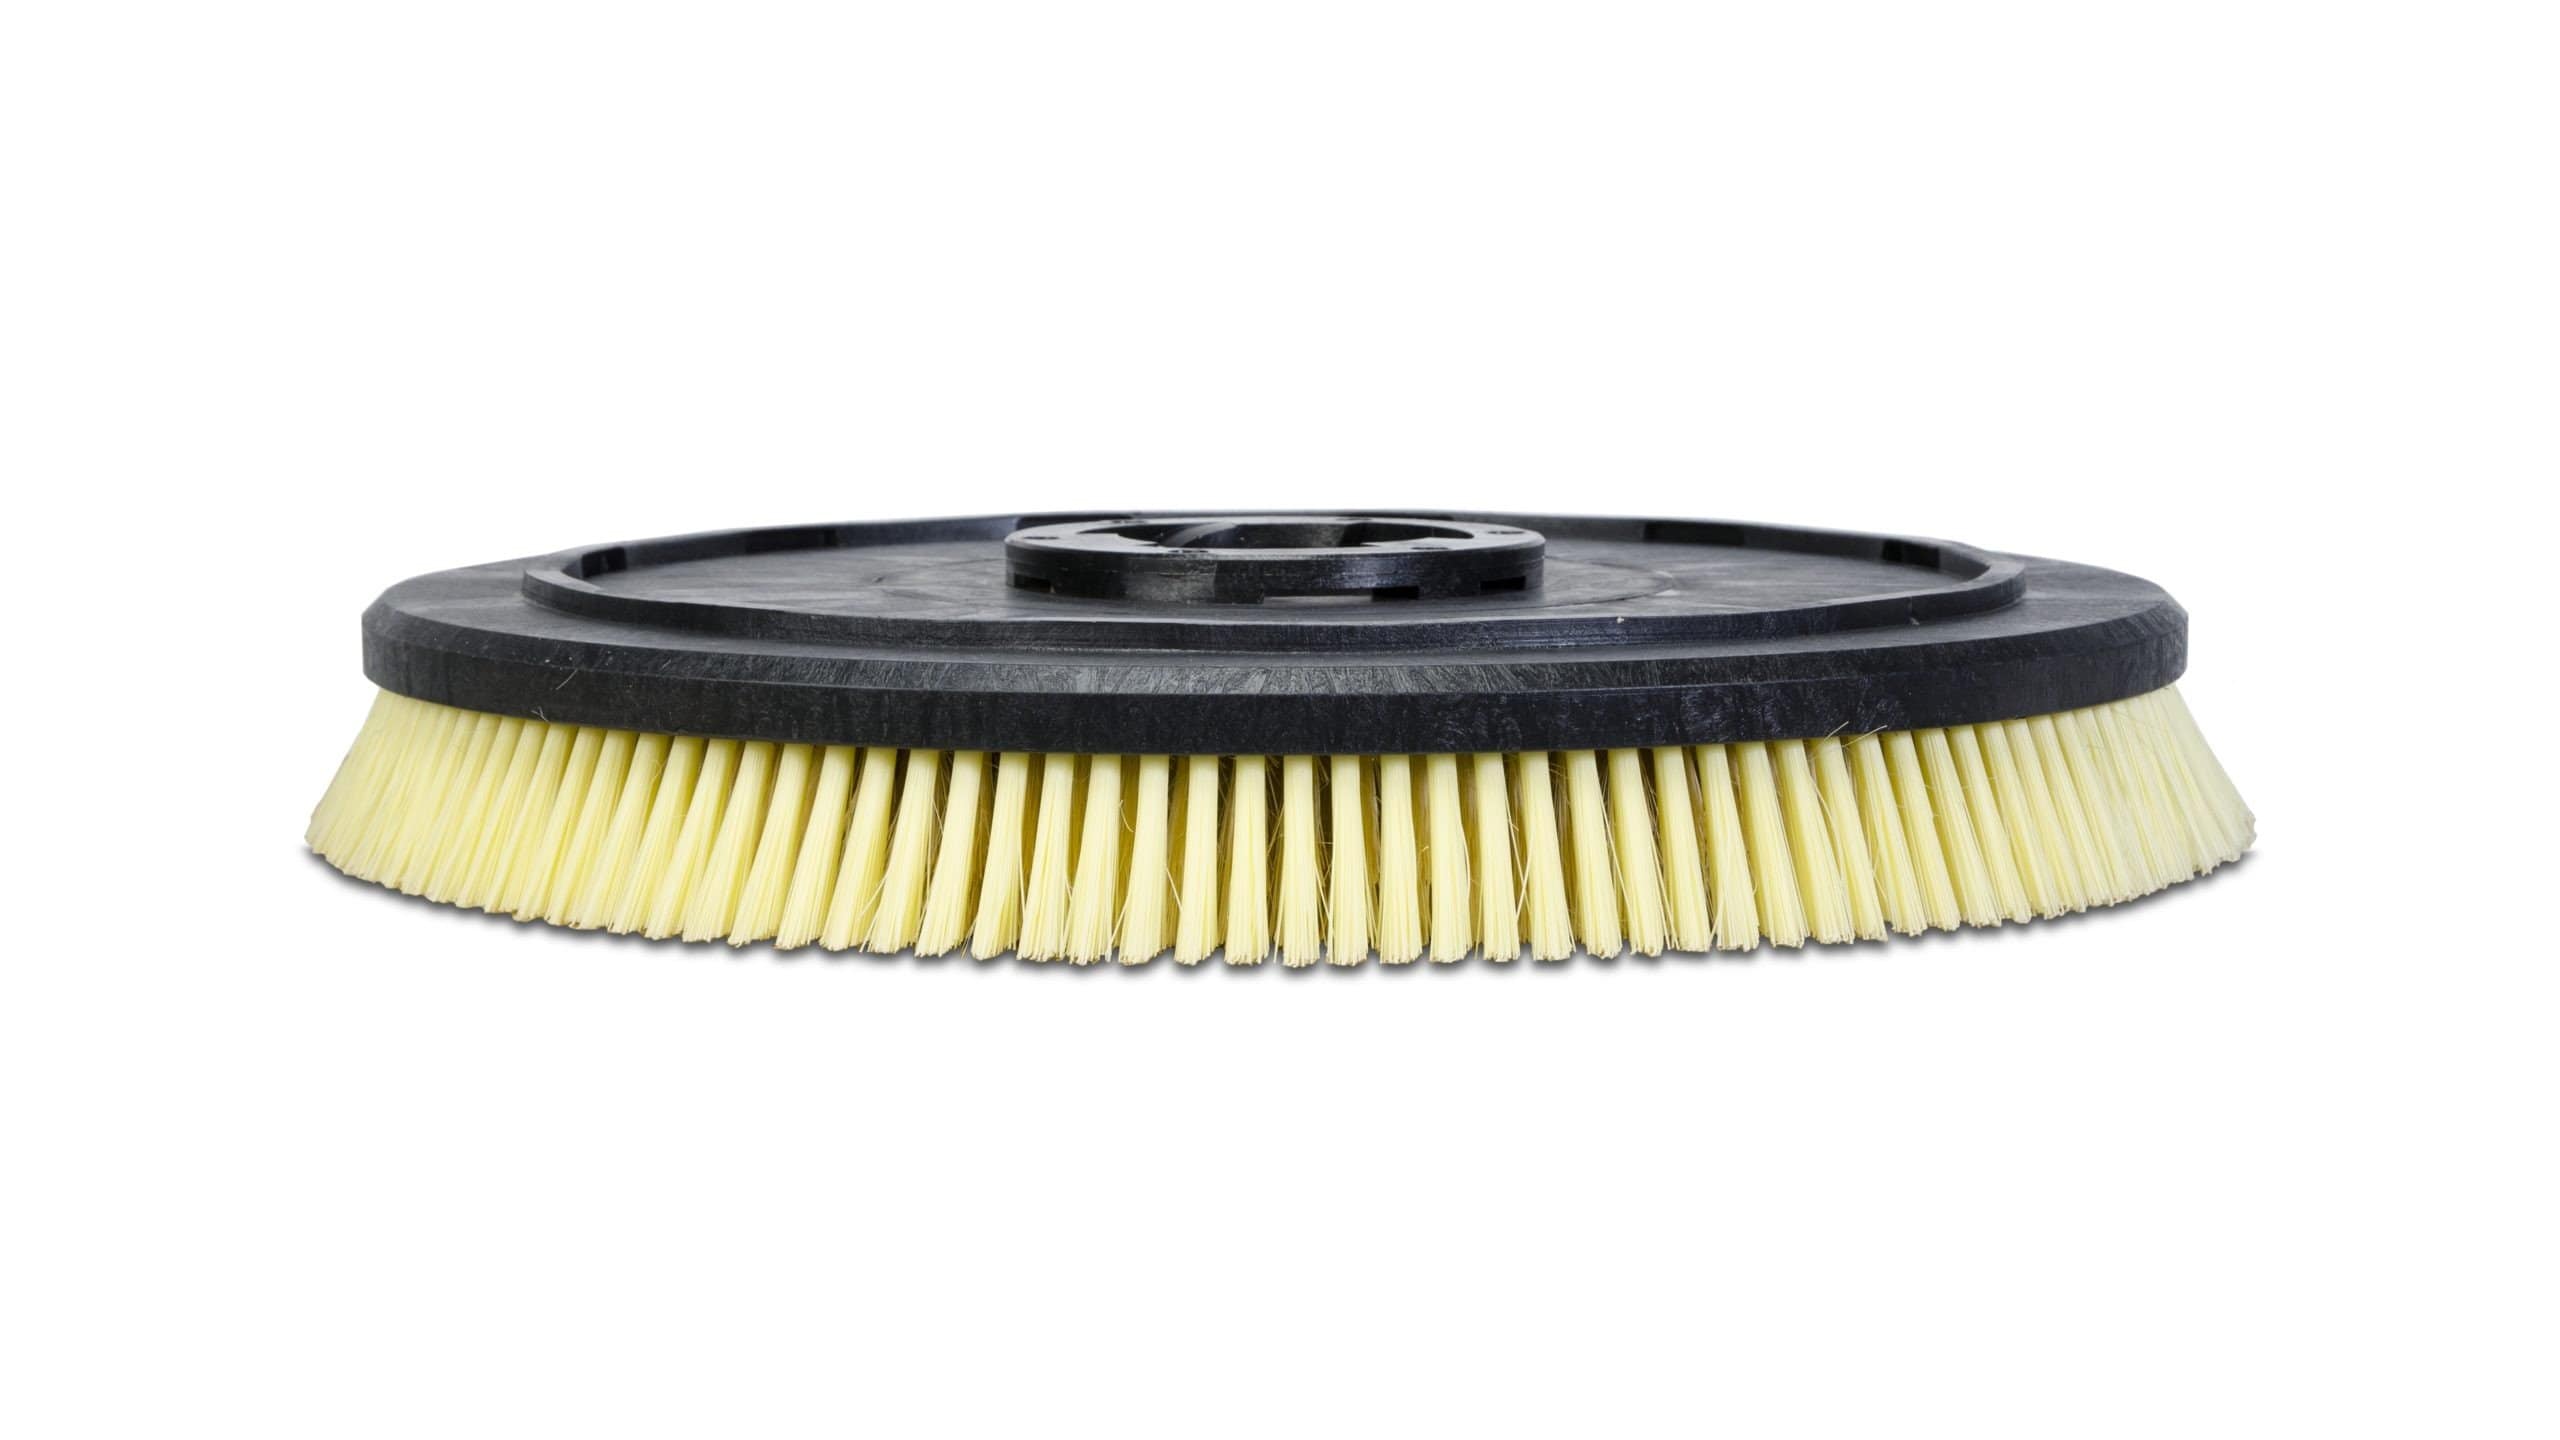 Total Wire Cup Twist Brush 75mm- TAC32031 | Supply Master | Accra, Ghana Tools Building Steel Engineering Hardware tool